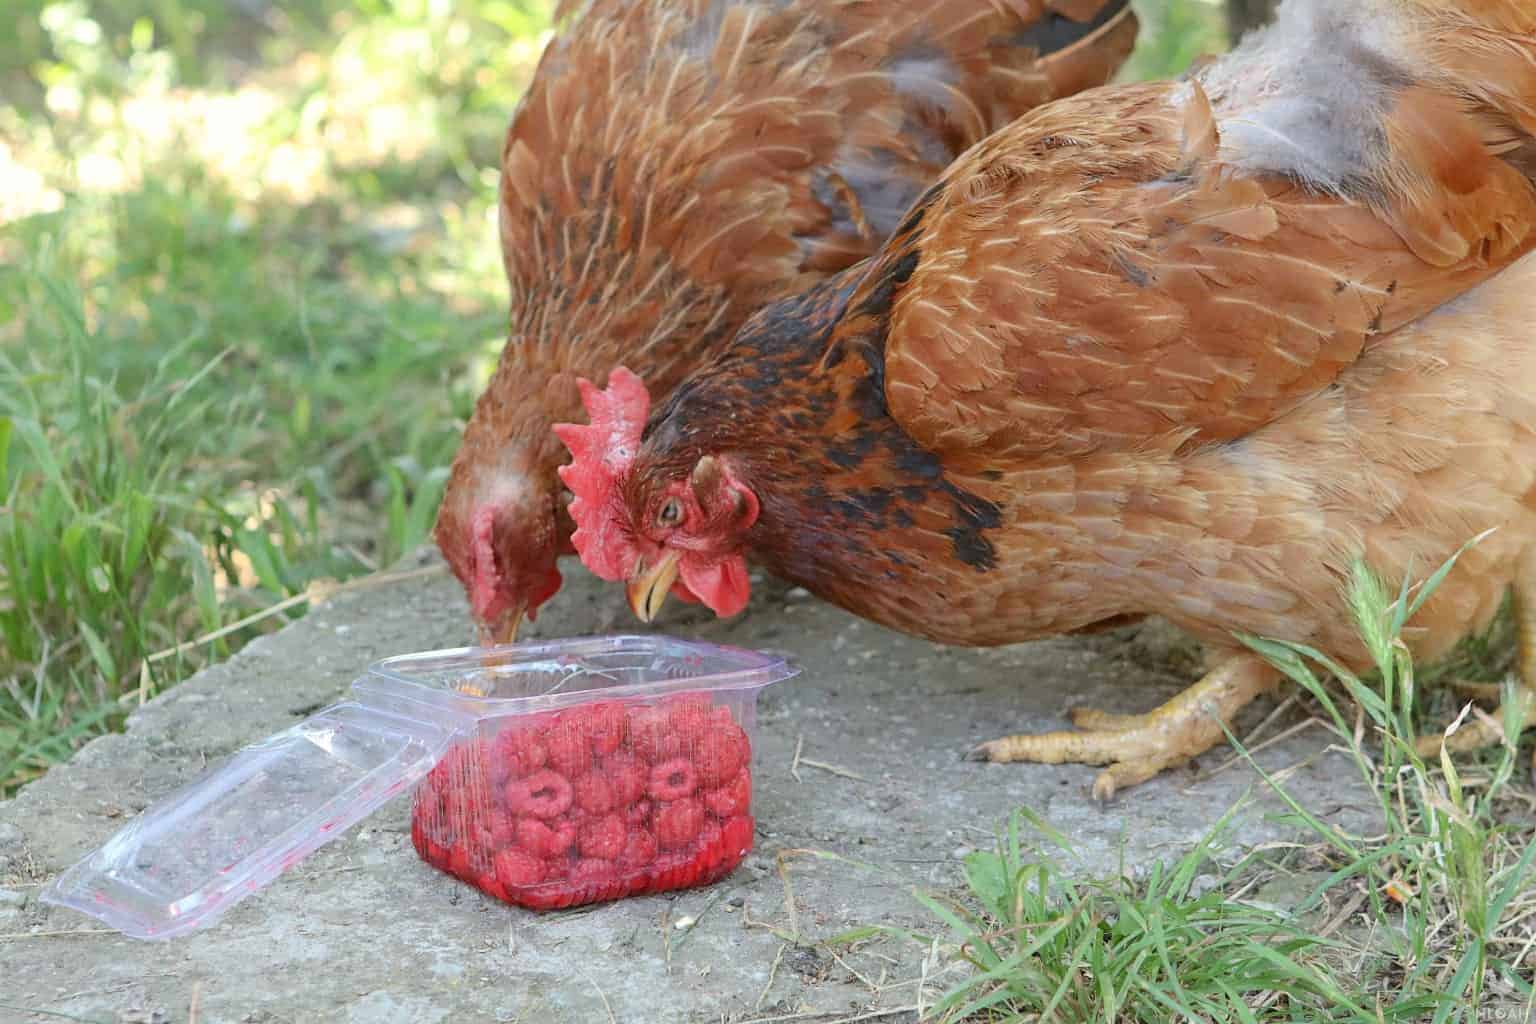 Are raspberries good for chickens